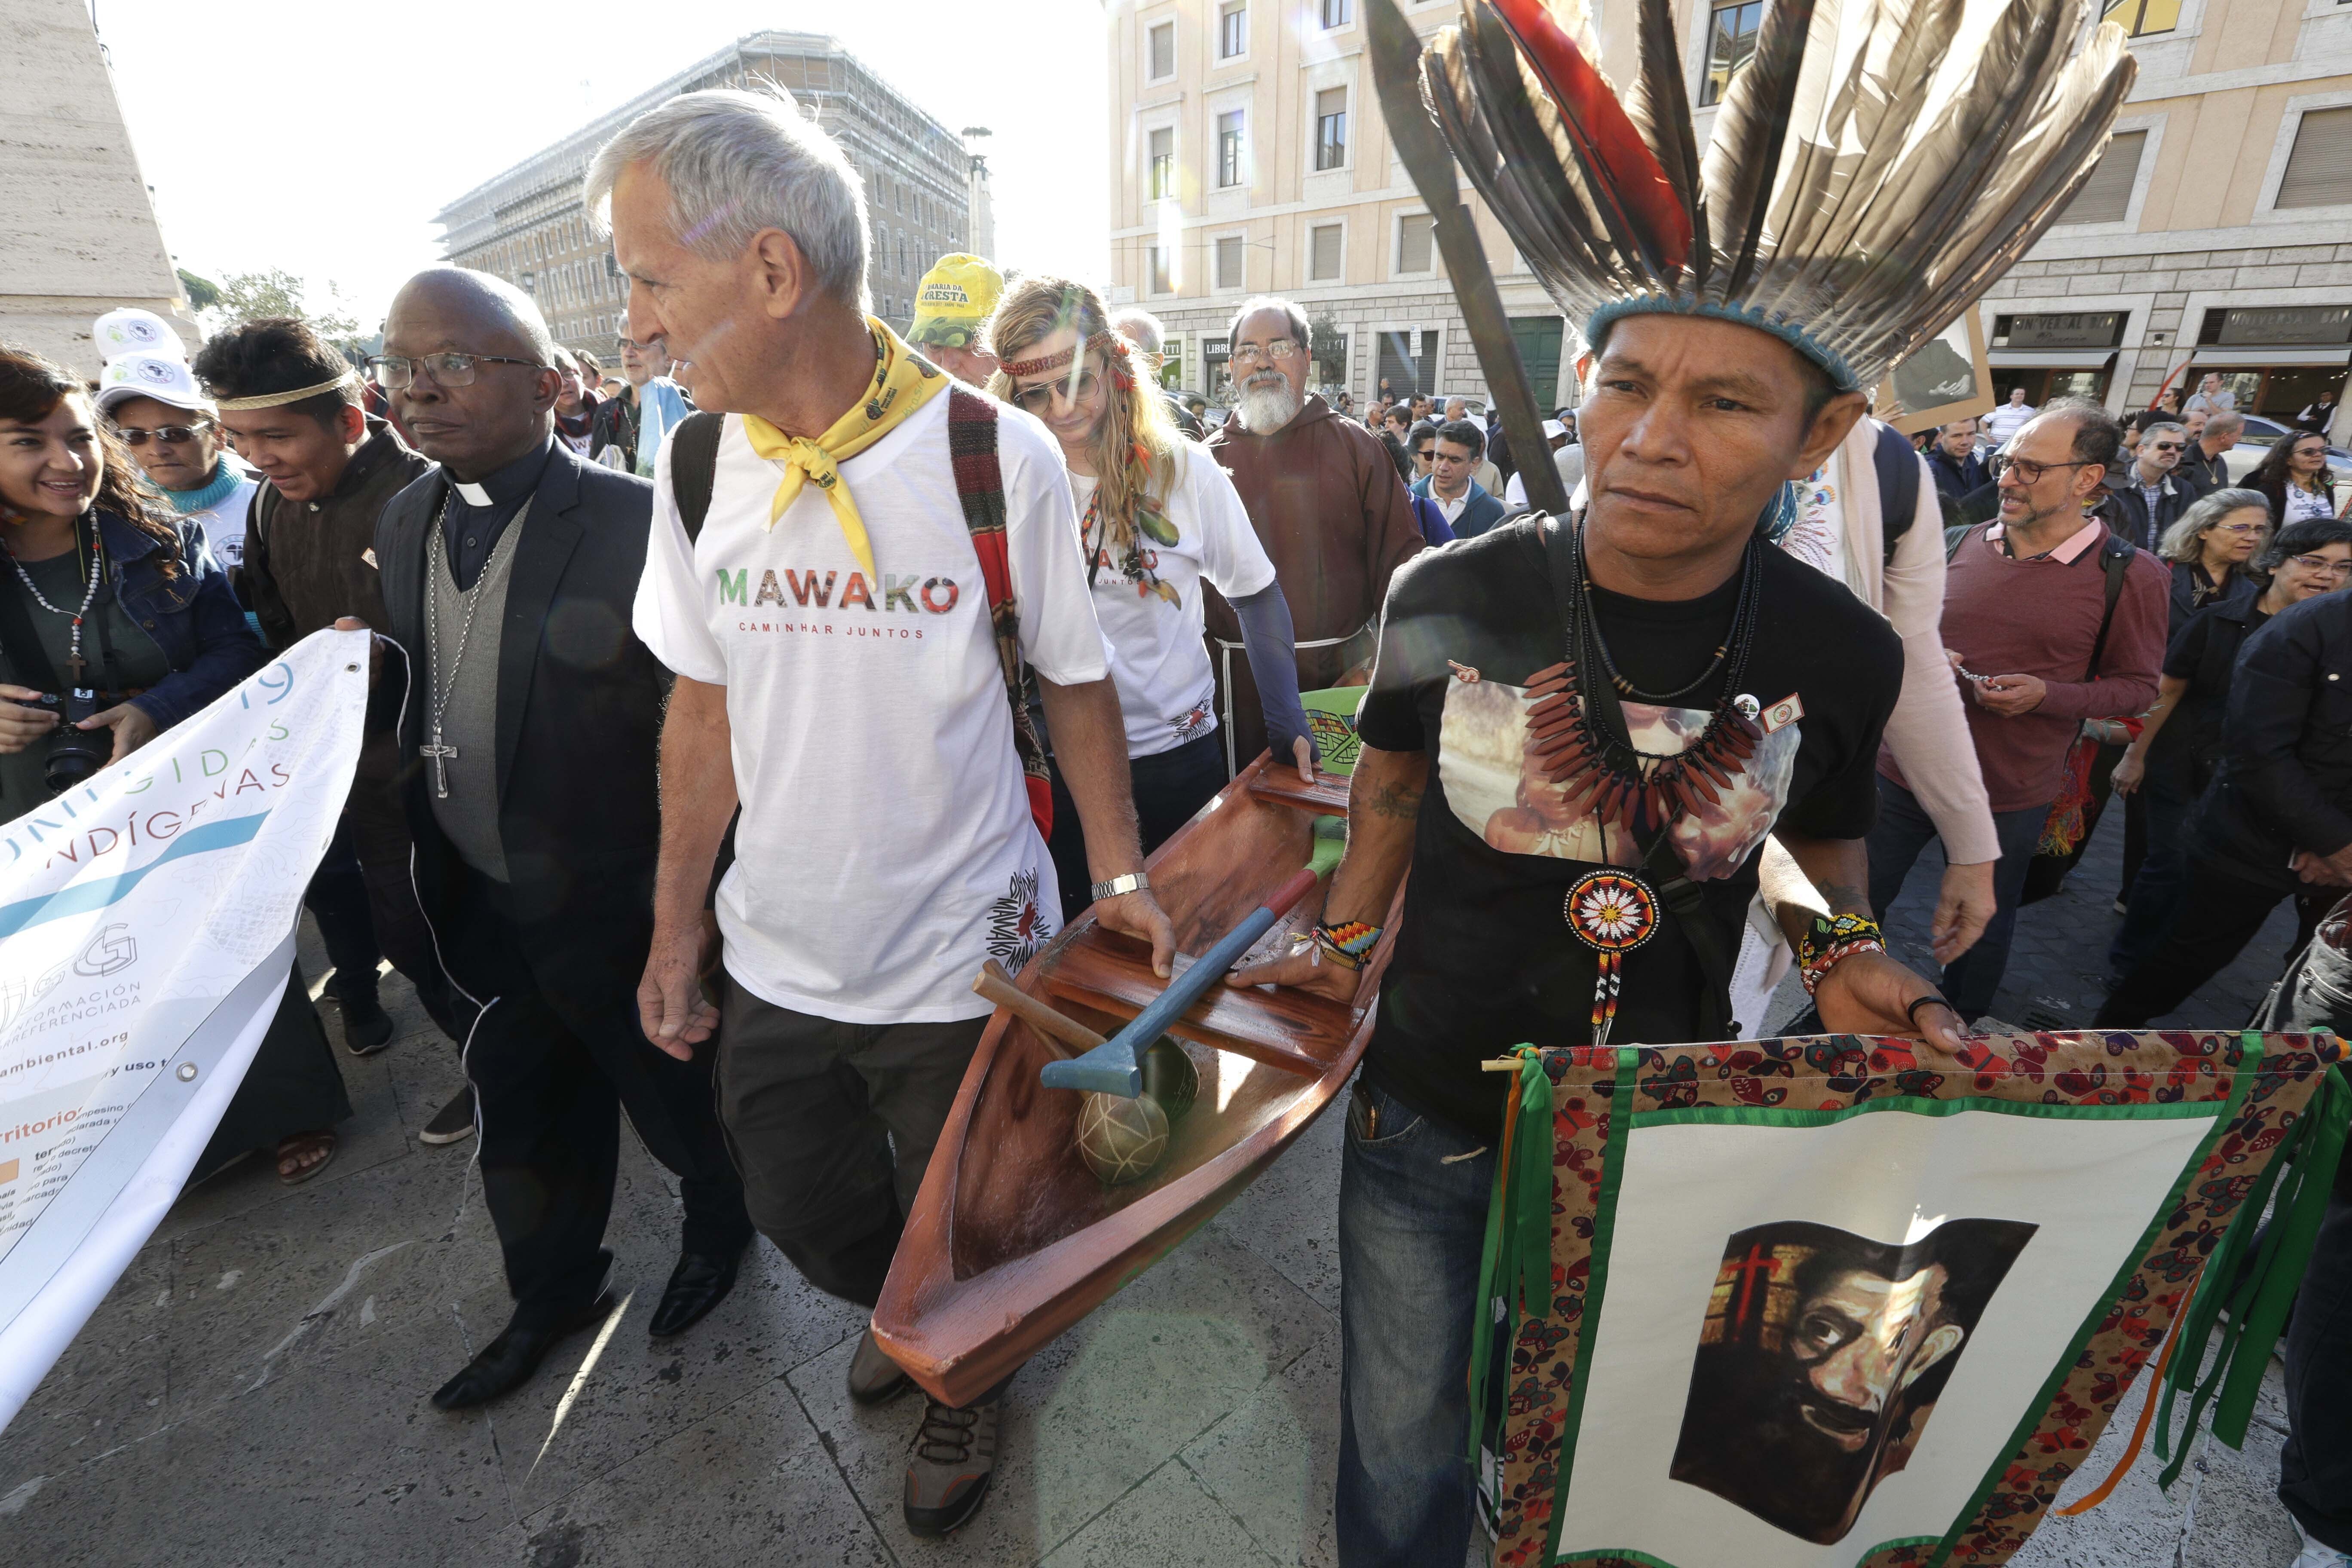 Members of Amazon indigenous populations walk during a Via Crucis (Way of the Cross) procession from St. Angelo Castle to the Vatican, Saturday, Oct. 19, 2019. Pope Francis is holding a three-week meeting on preserving the rainforest and ministering to its native people as he fended off attacks from conservatives who are opposed to his ecological agenda. (AP Photo/Andrew Medichini)